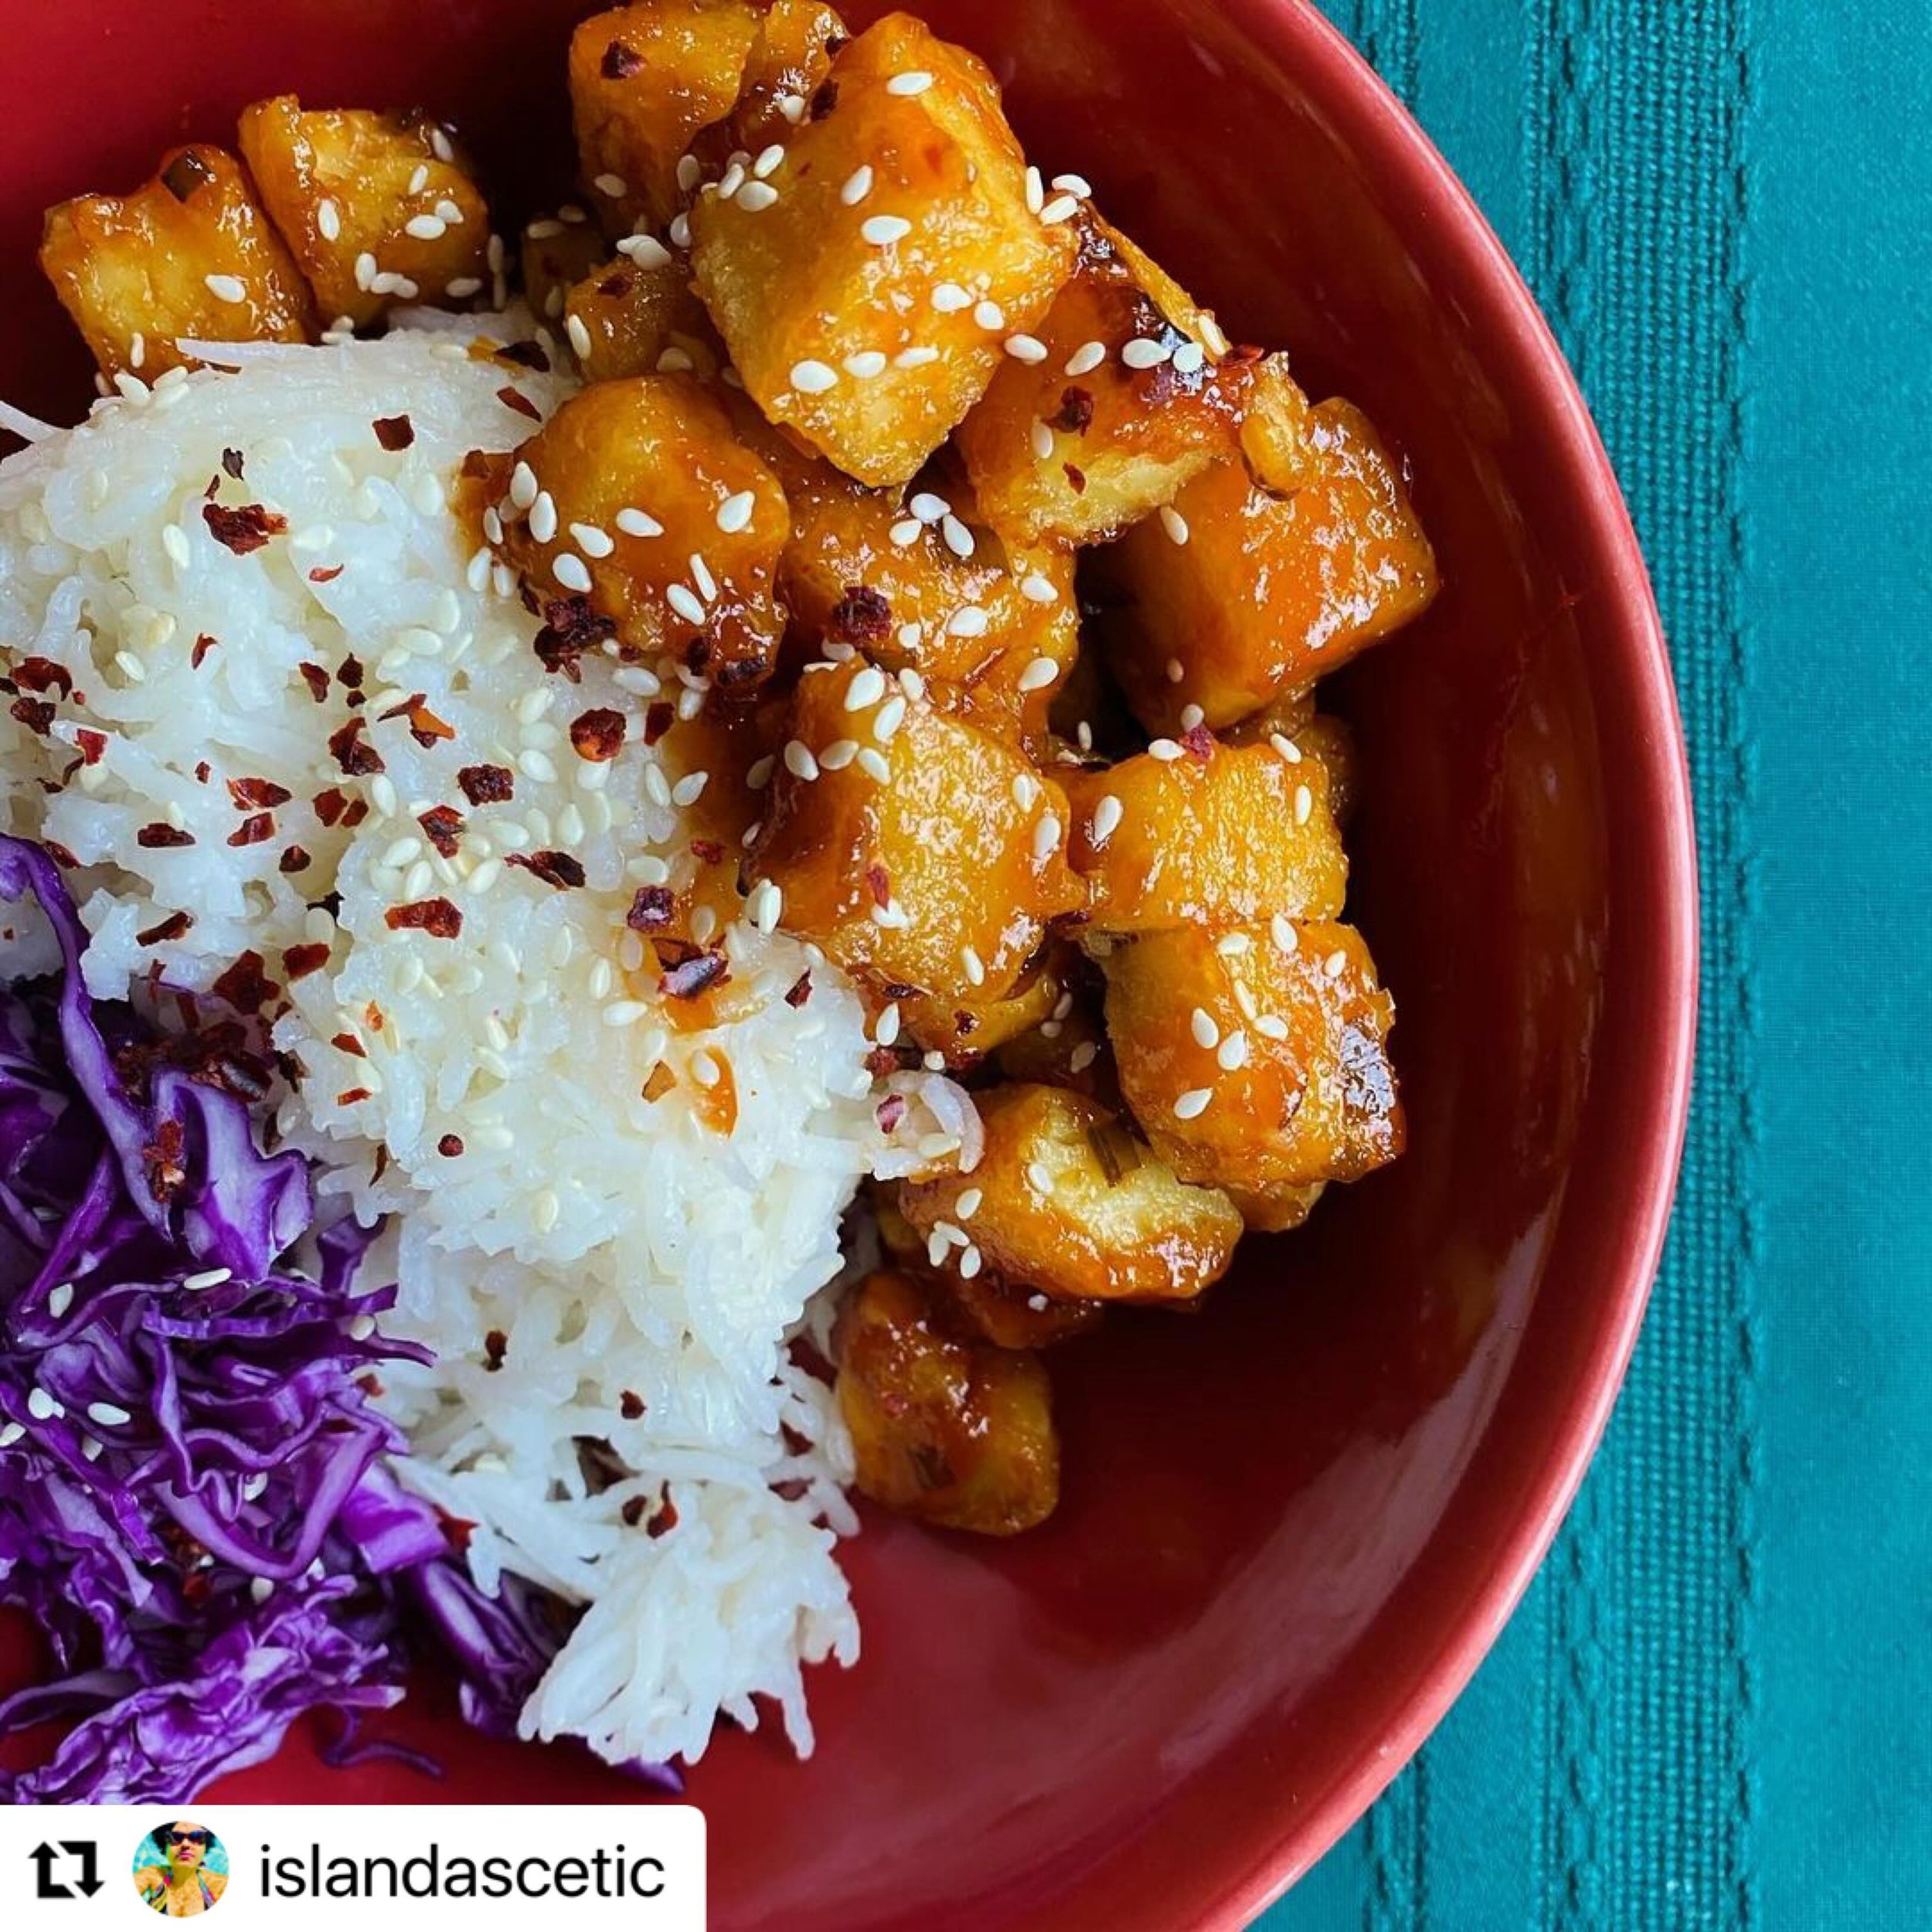 ❤️ this post if you wish you had a big bowl of this sticky, sweet and spicy Chickpea Tofu for lunch! Thank you, @islandascetic! 

&bull; &bull; &bull;

#Repost @islandascetic 
・・・
It&rsquo;s simple bowl Monday.

Pile sticky, sweet, and spicy chickpea